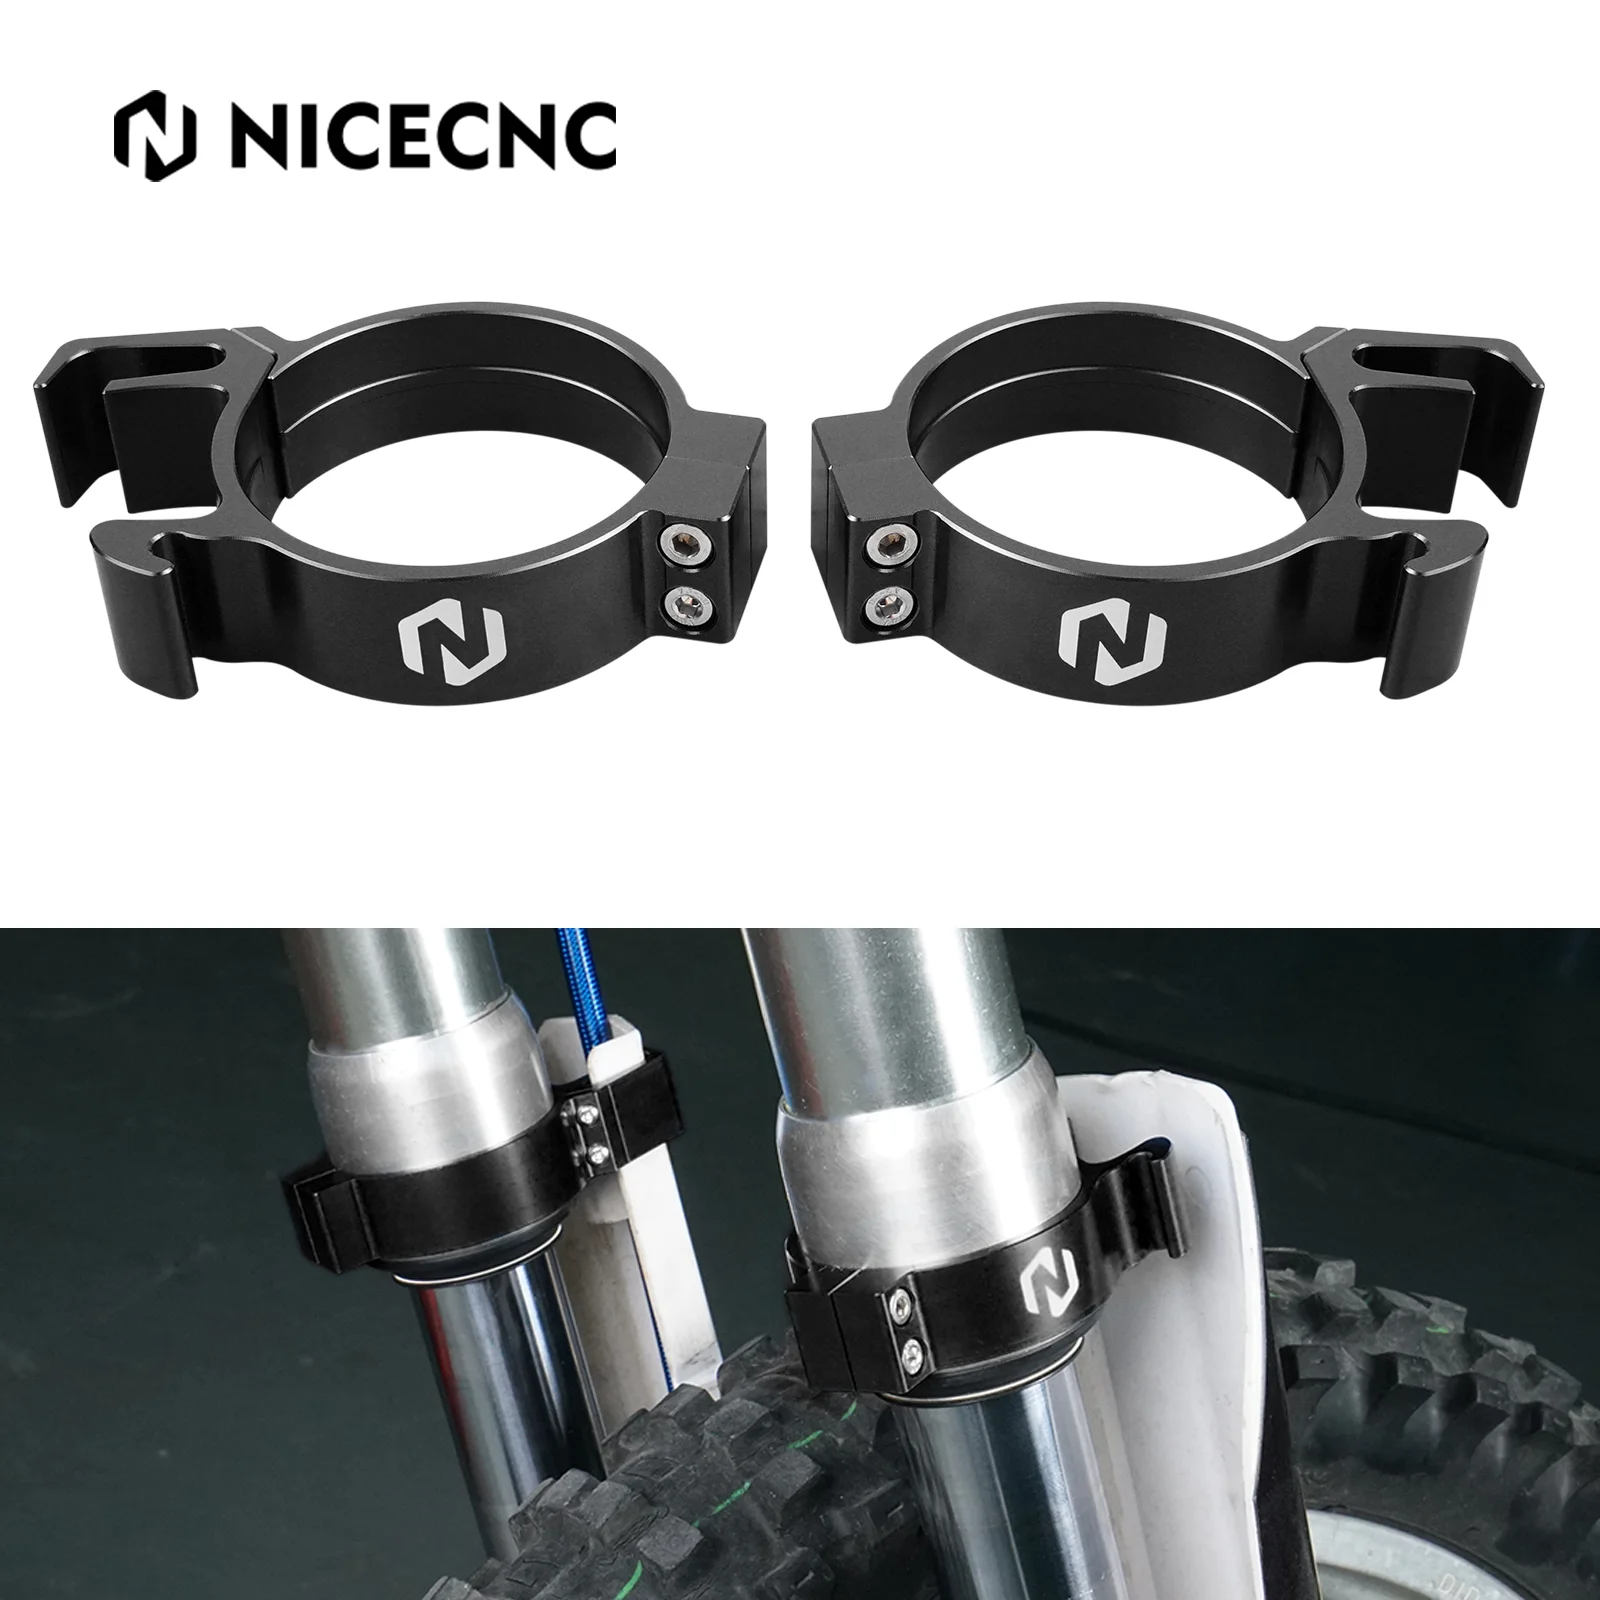 

NiceCNC Front Fender Retainer Holder For Yamaha YZ85 2002-2018 2017 YZ80 1993-2001 YZ 85 80 Wire Routing Clamp Clips Motorcycle